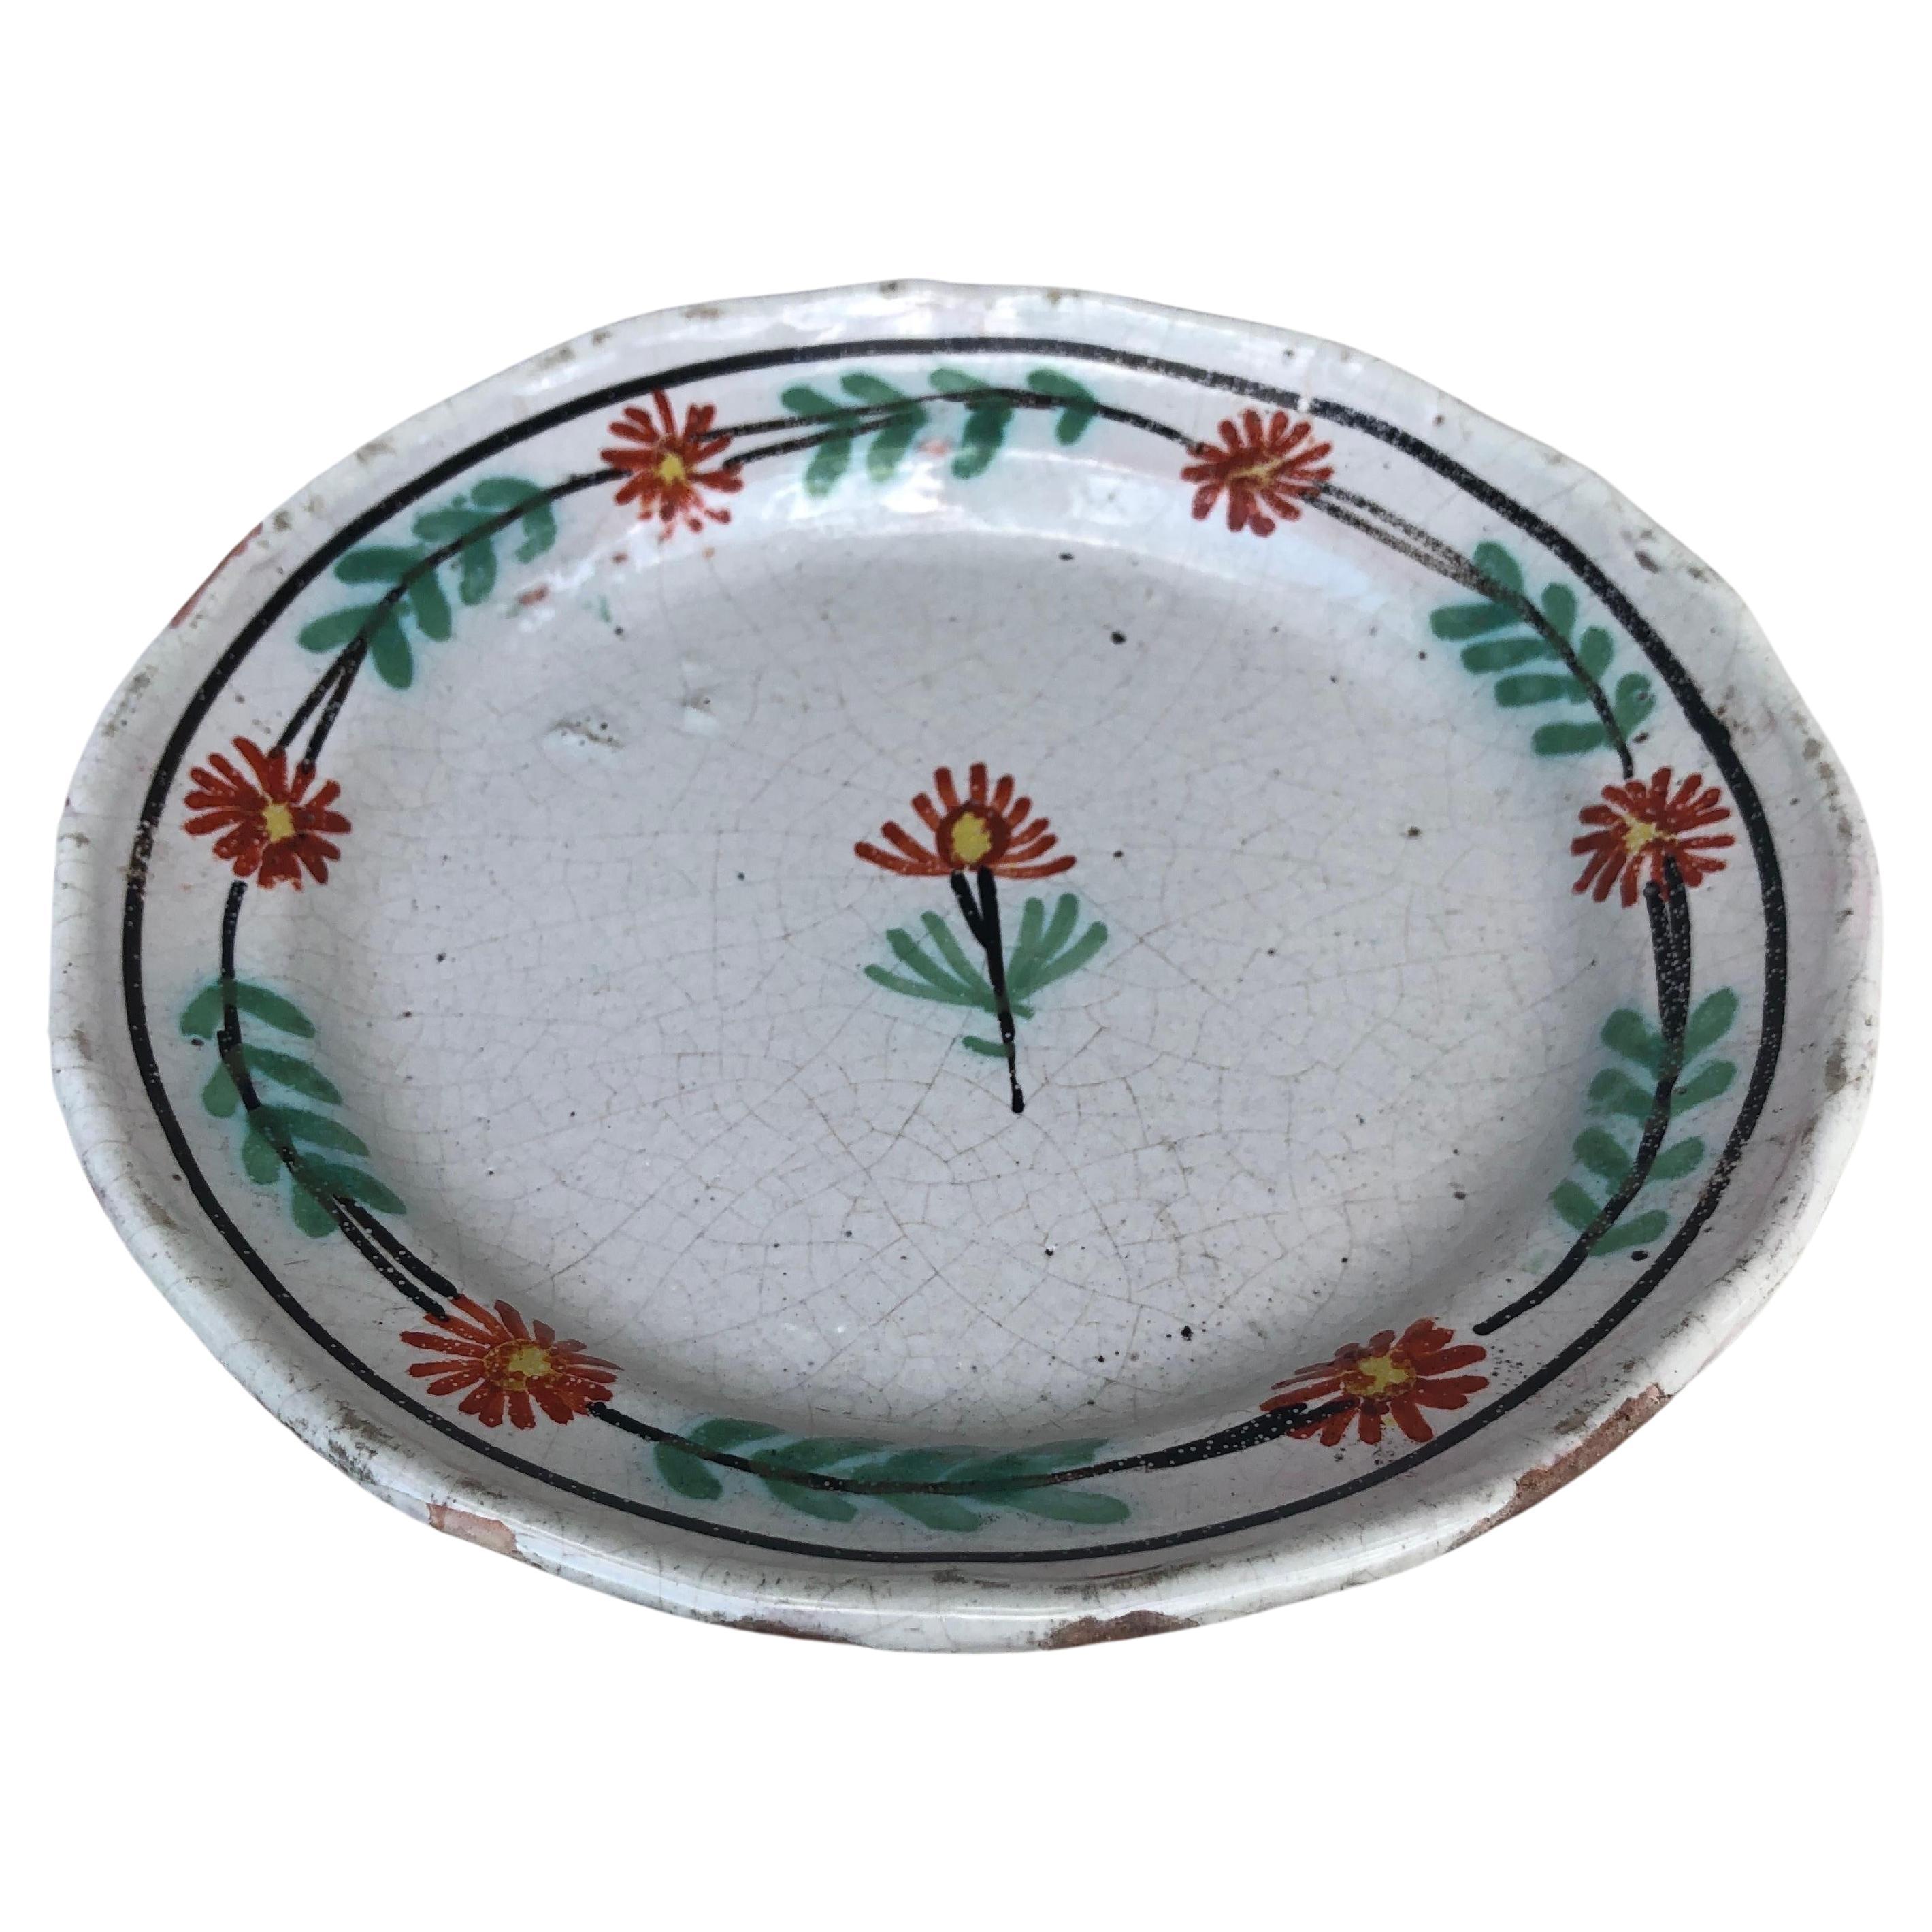 French Rustic Faience Flower Plate Circa 1890.
Normandy.
Mark on the back.